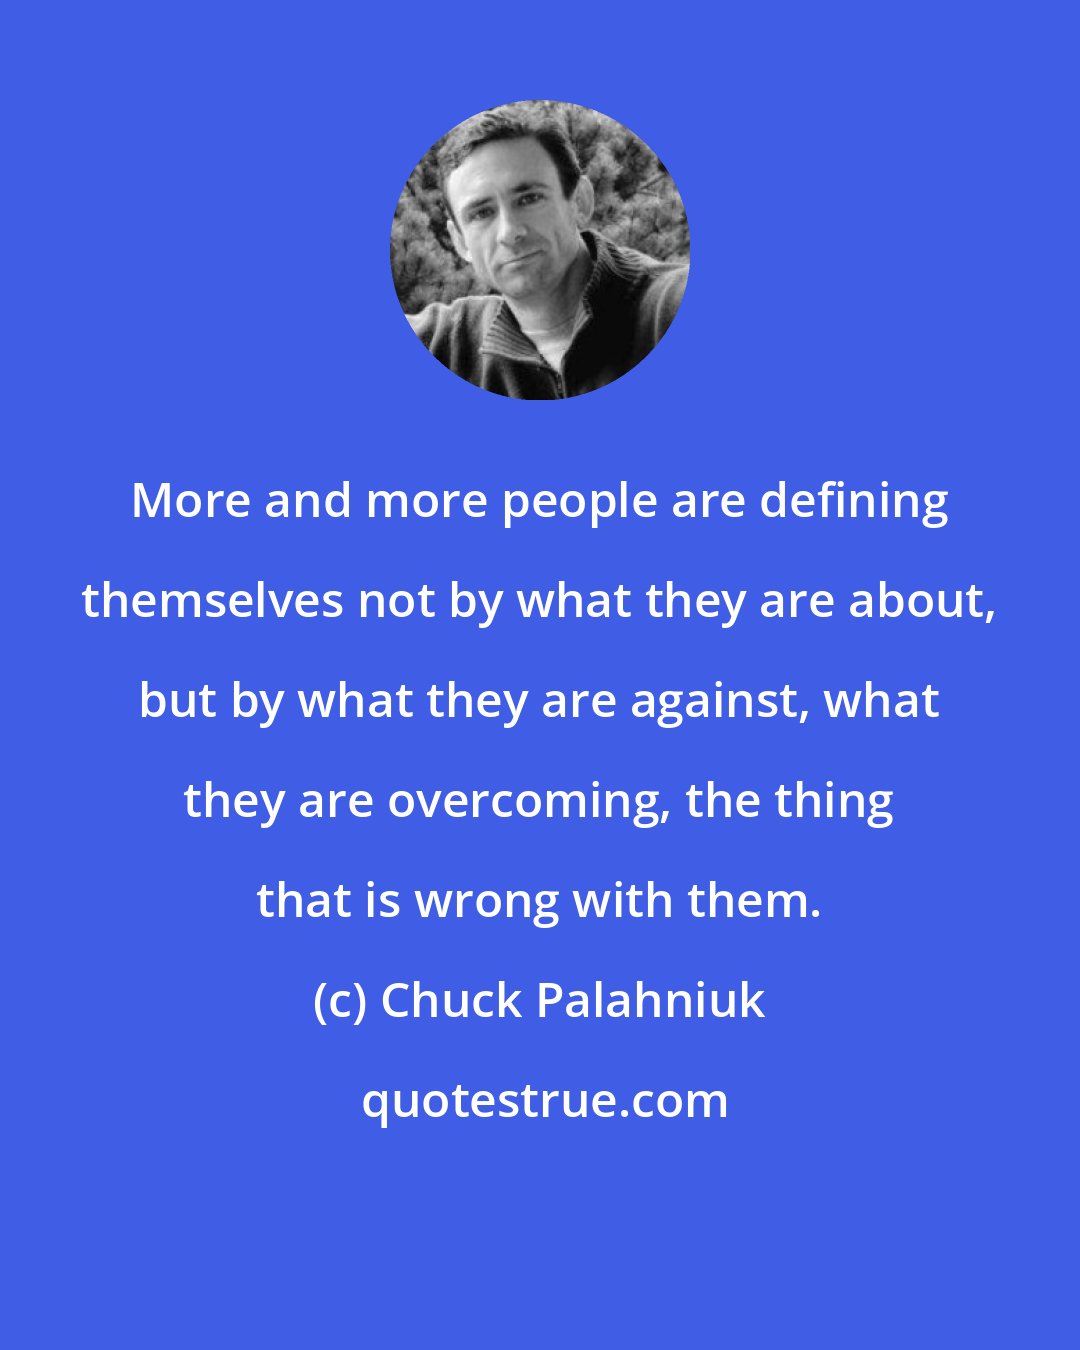 Chuck Palahniuk: More and more people are defining themselves not by what they are about, but by what they are against, what they are overcoming, the thing that is wrong with them.